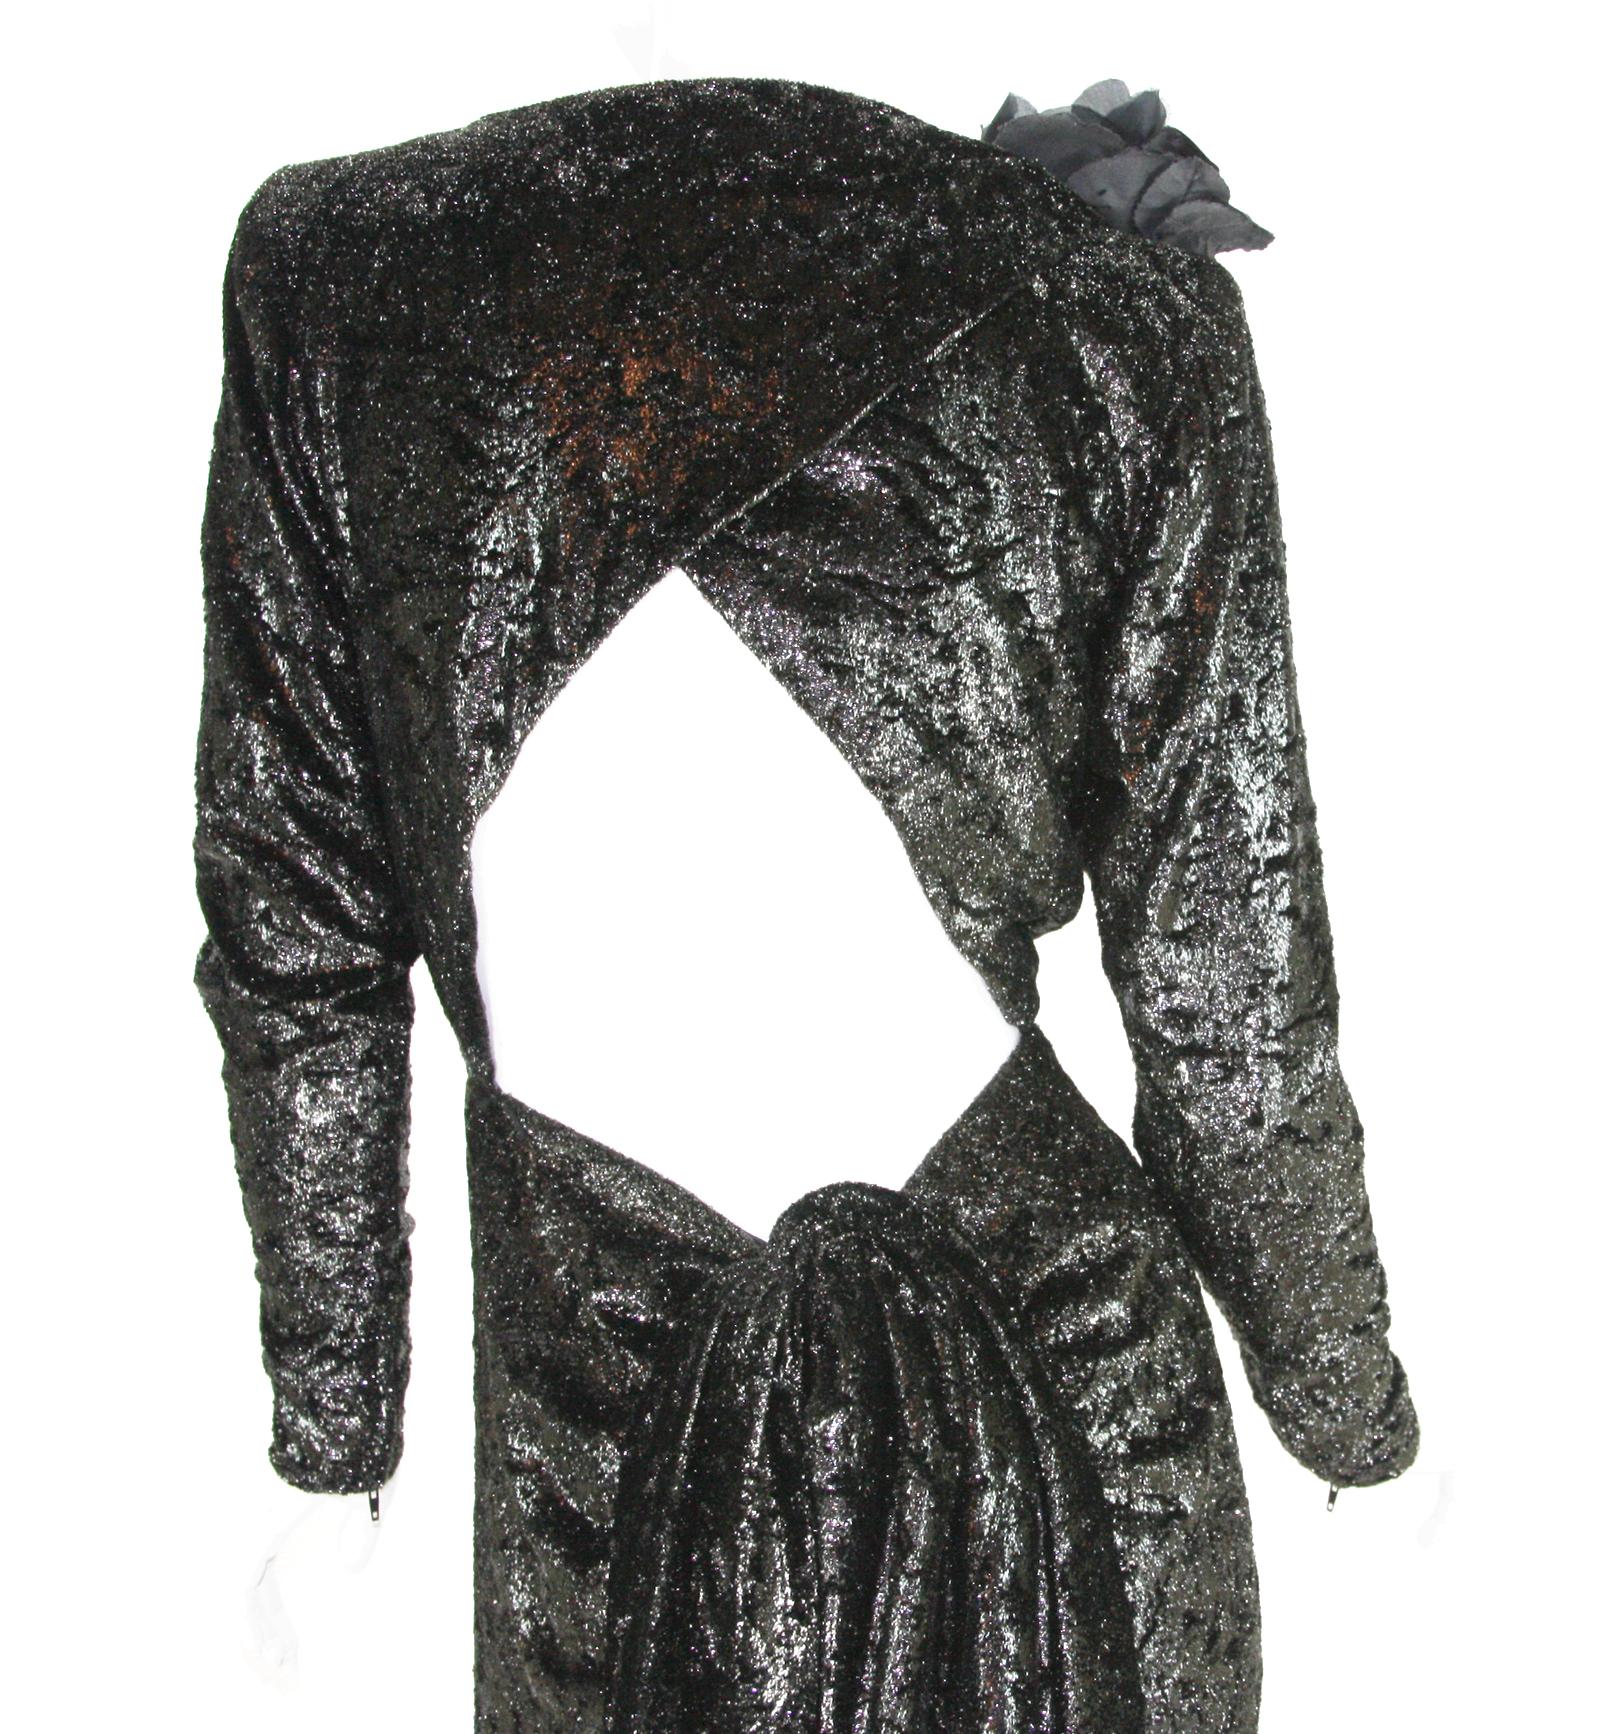 Rare 2 in 1 Yves Saint Laurent Couture Crushed Velvet Numbered Dress c. 1986 For Sale 5